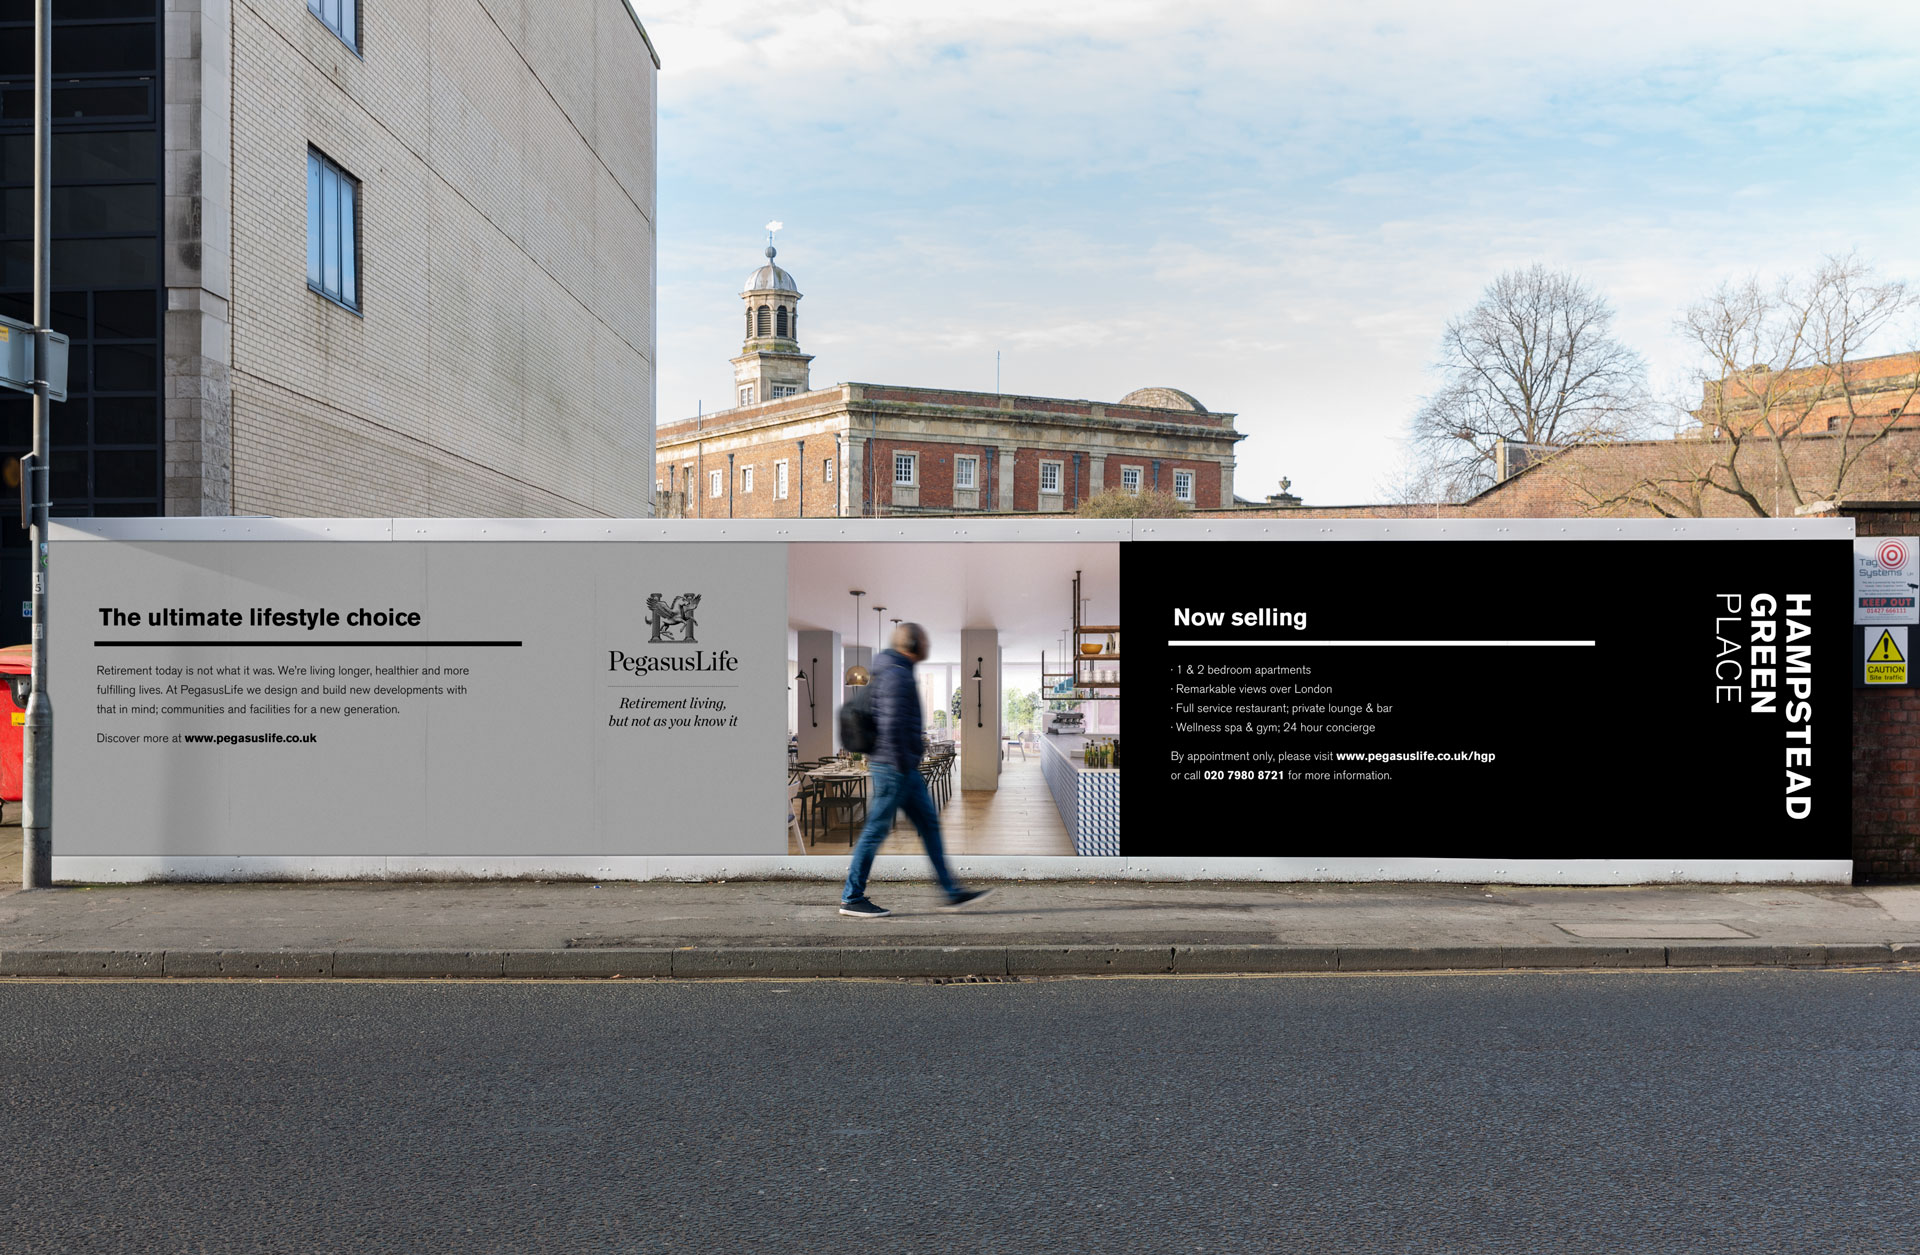 An image to show external hoardings for a PegasusLife retirement development.